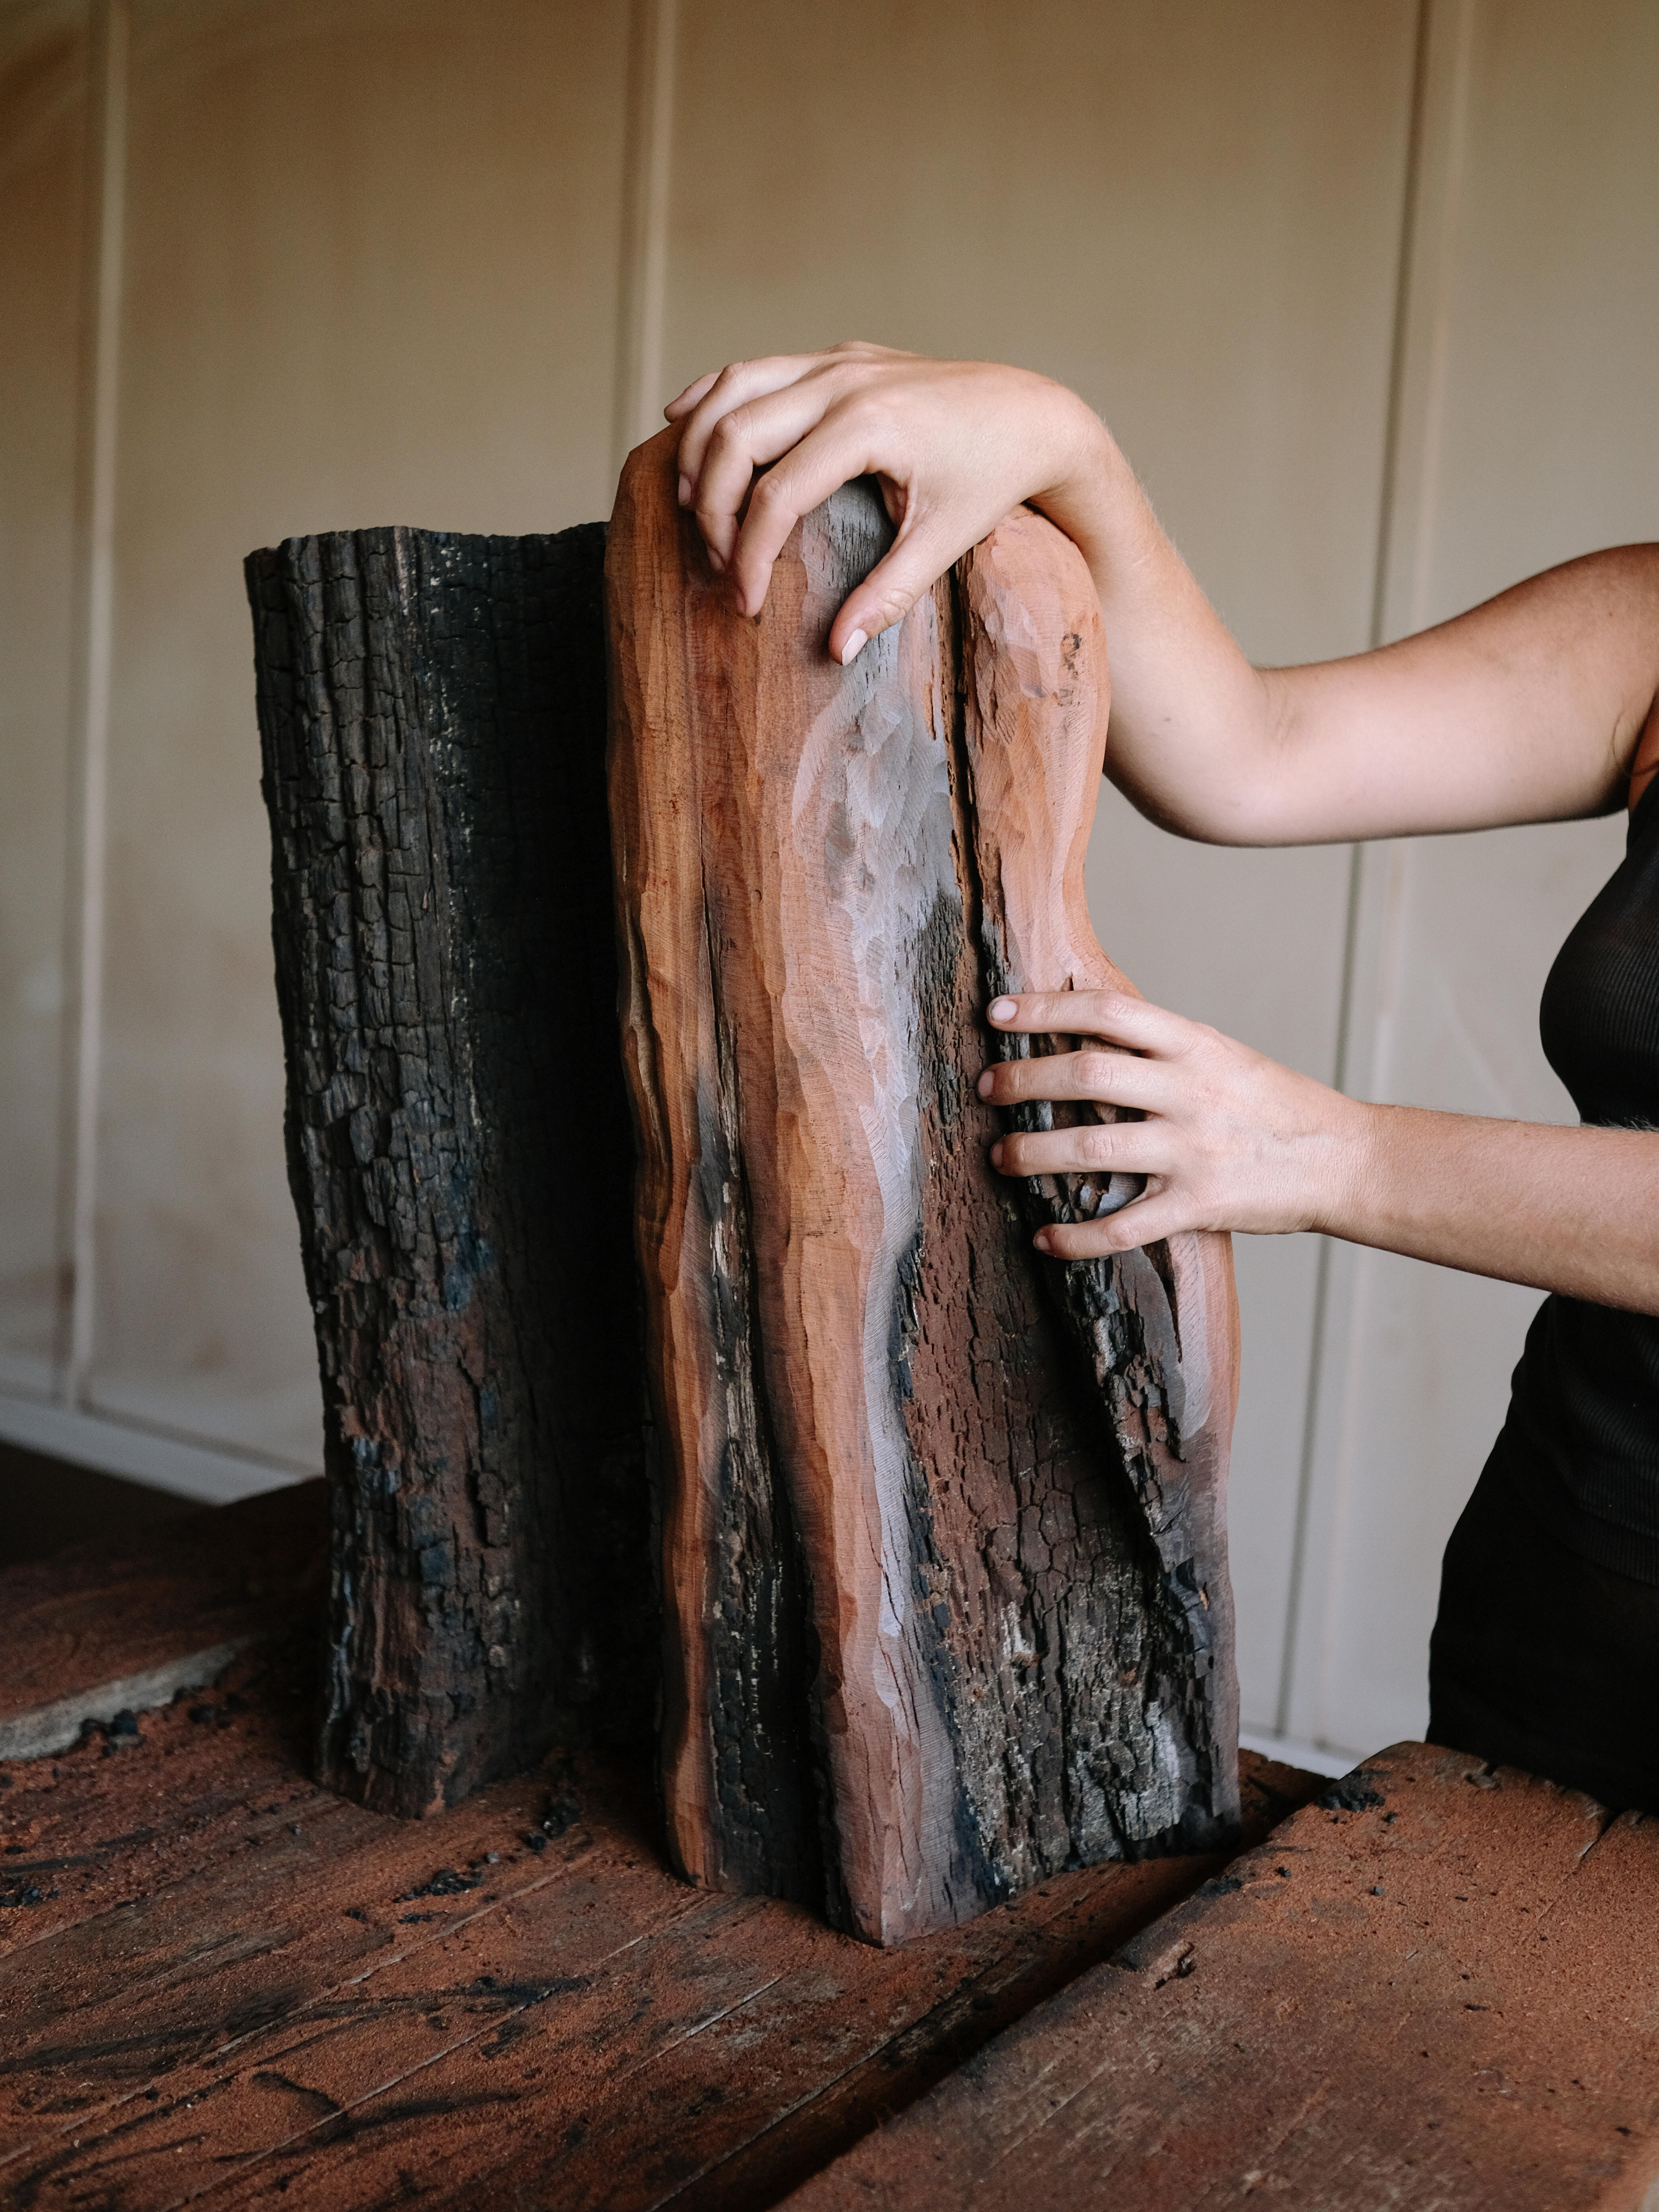 The artist holds a large piece of partially carved wood